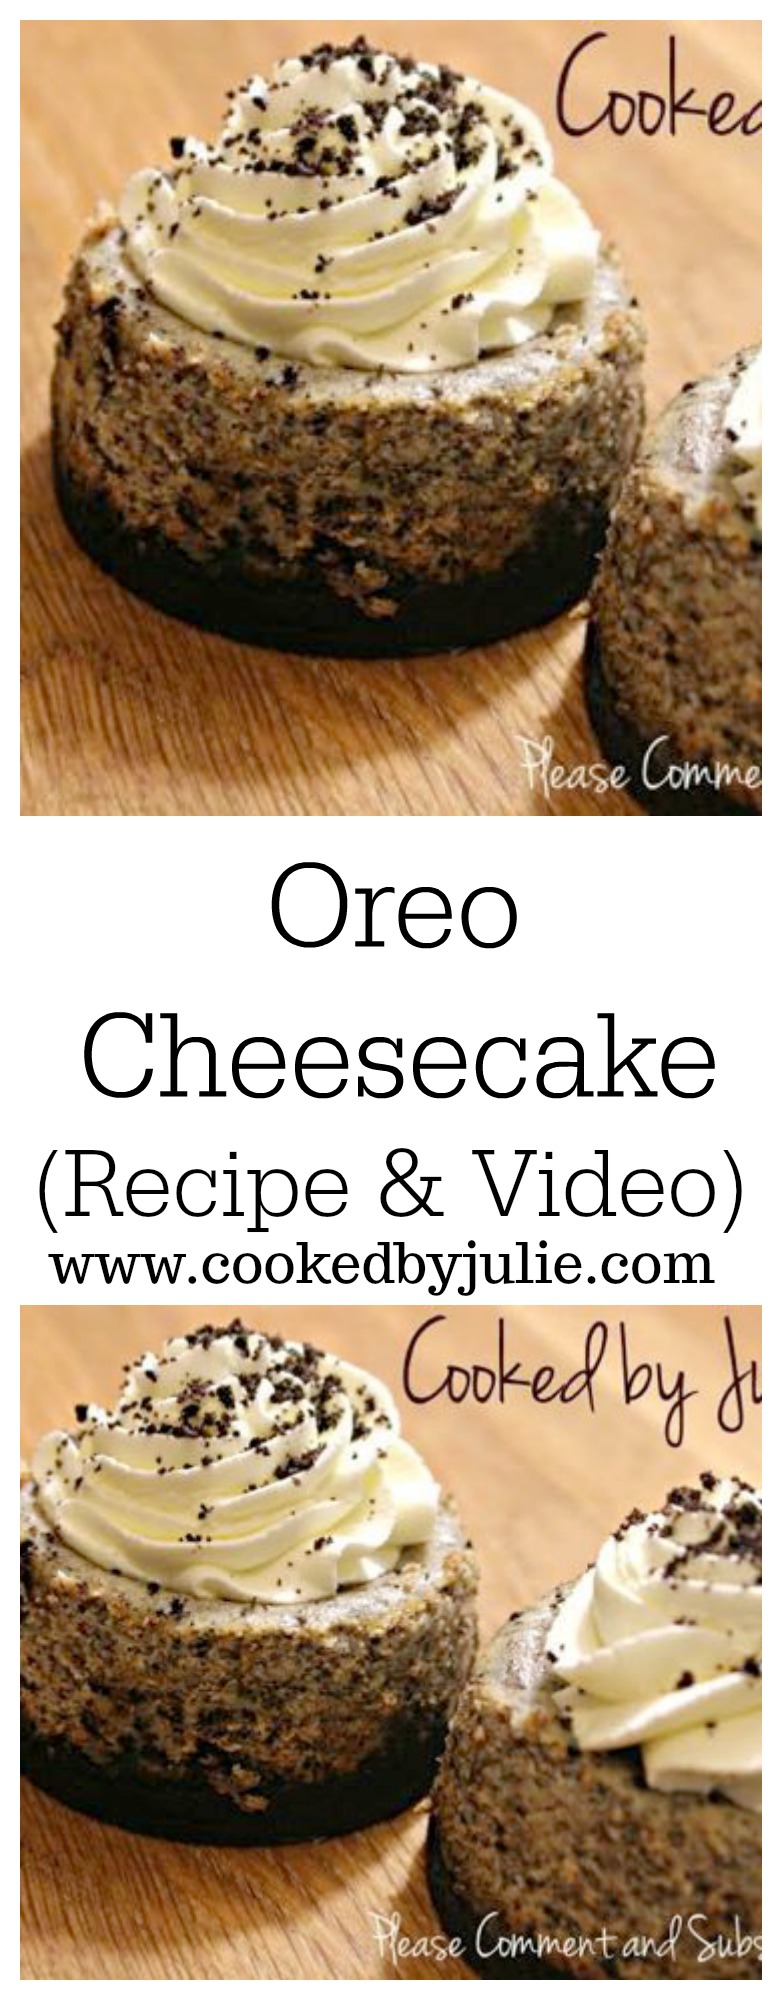 Mini Oreo Cheesecake Bites | Recipe with Video by Cooked By Julie